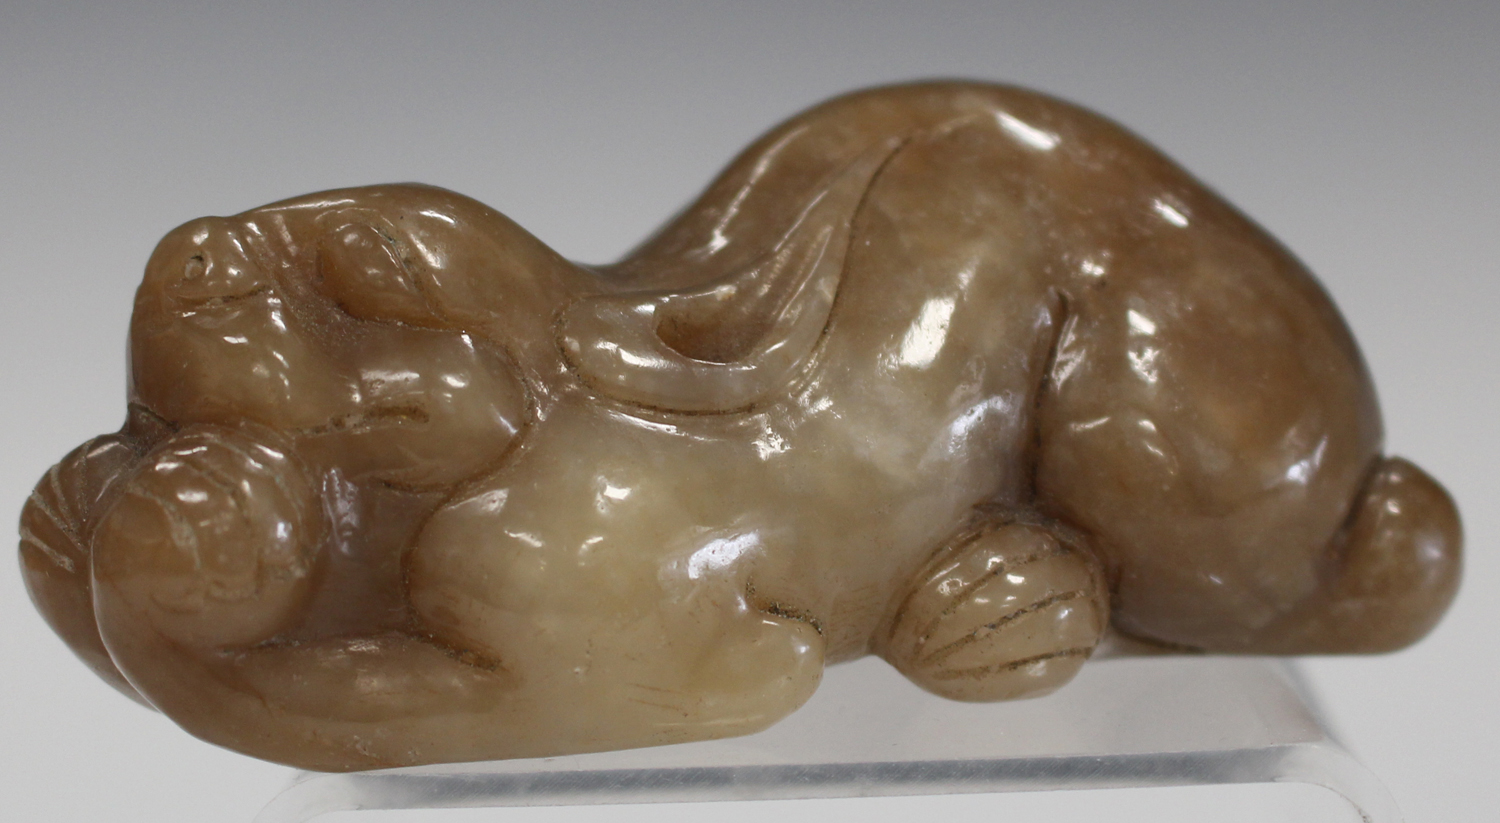 A Chinese brown jade carving, probably late 20th century, modelled as a recumbent crouching feline